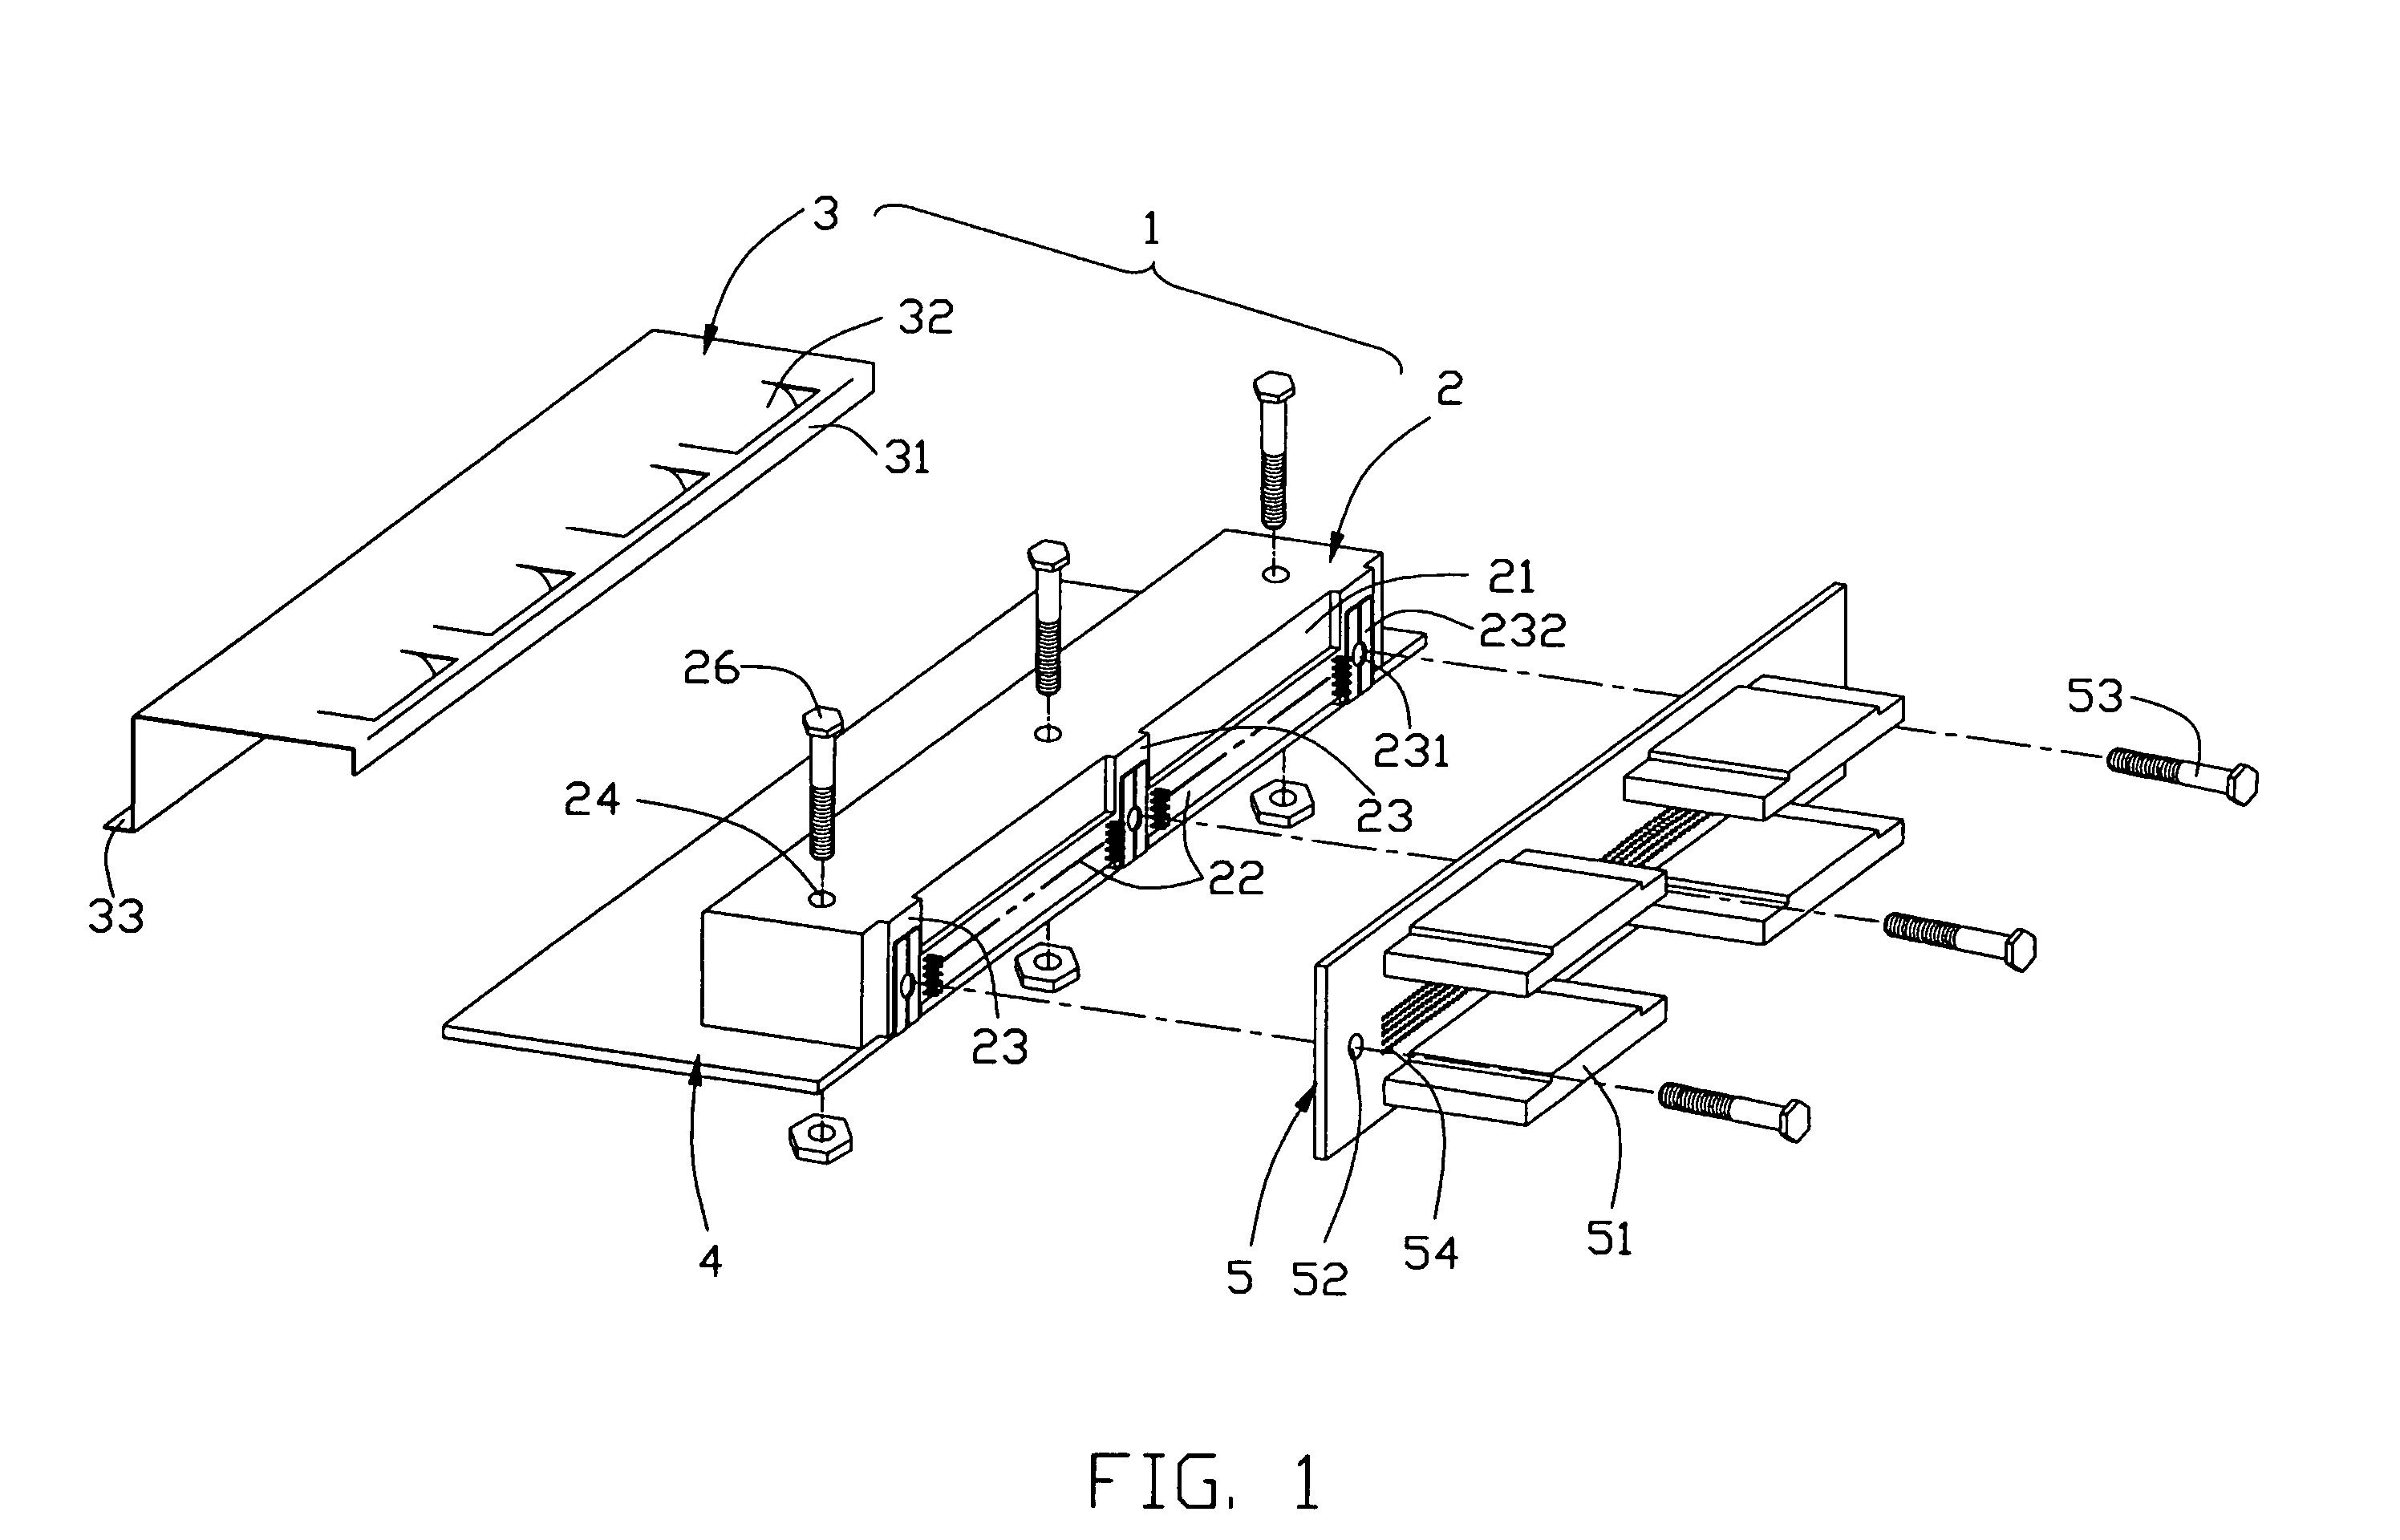 Connector assembly for printed circuit board interconnection